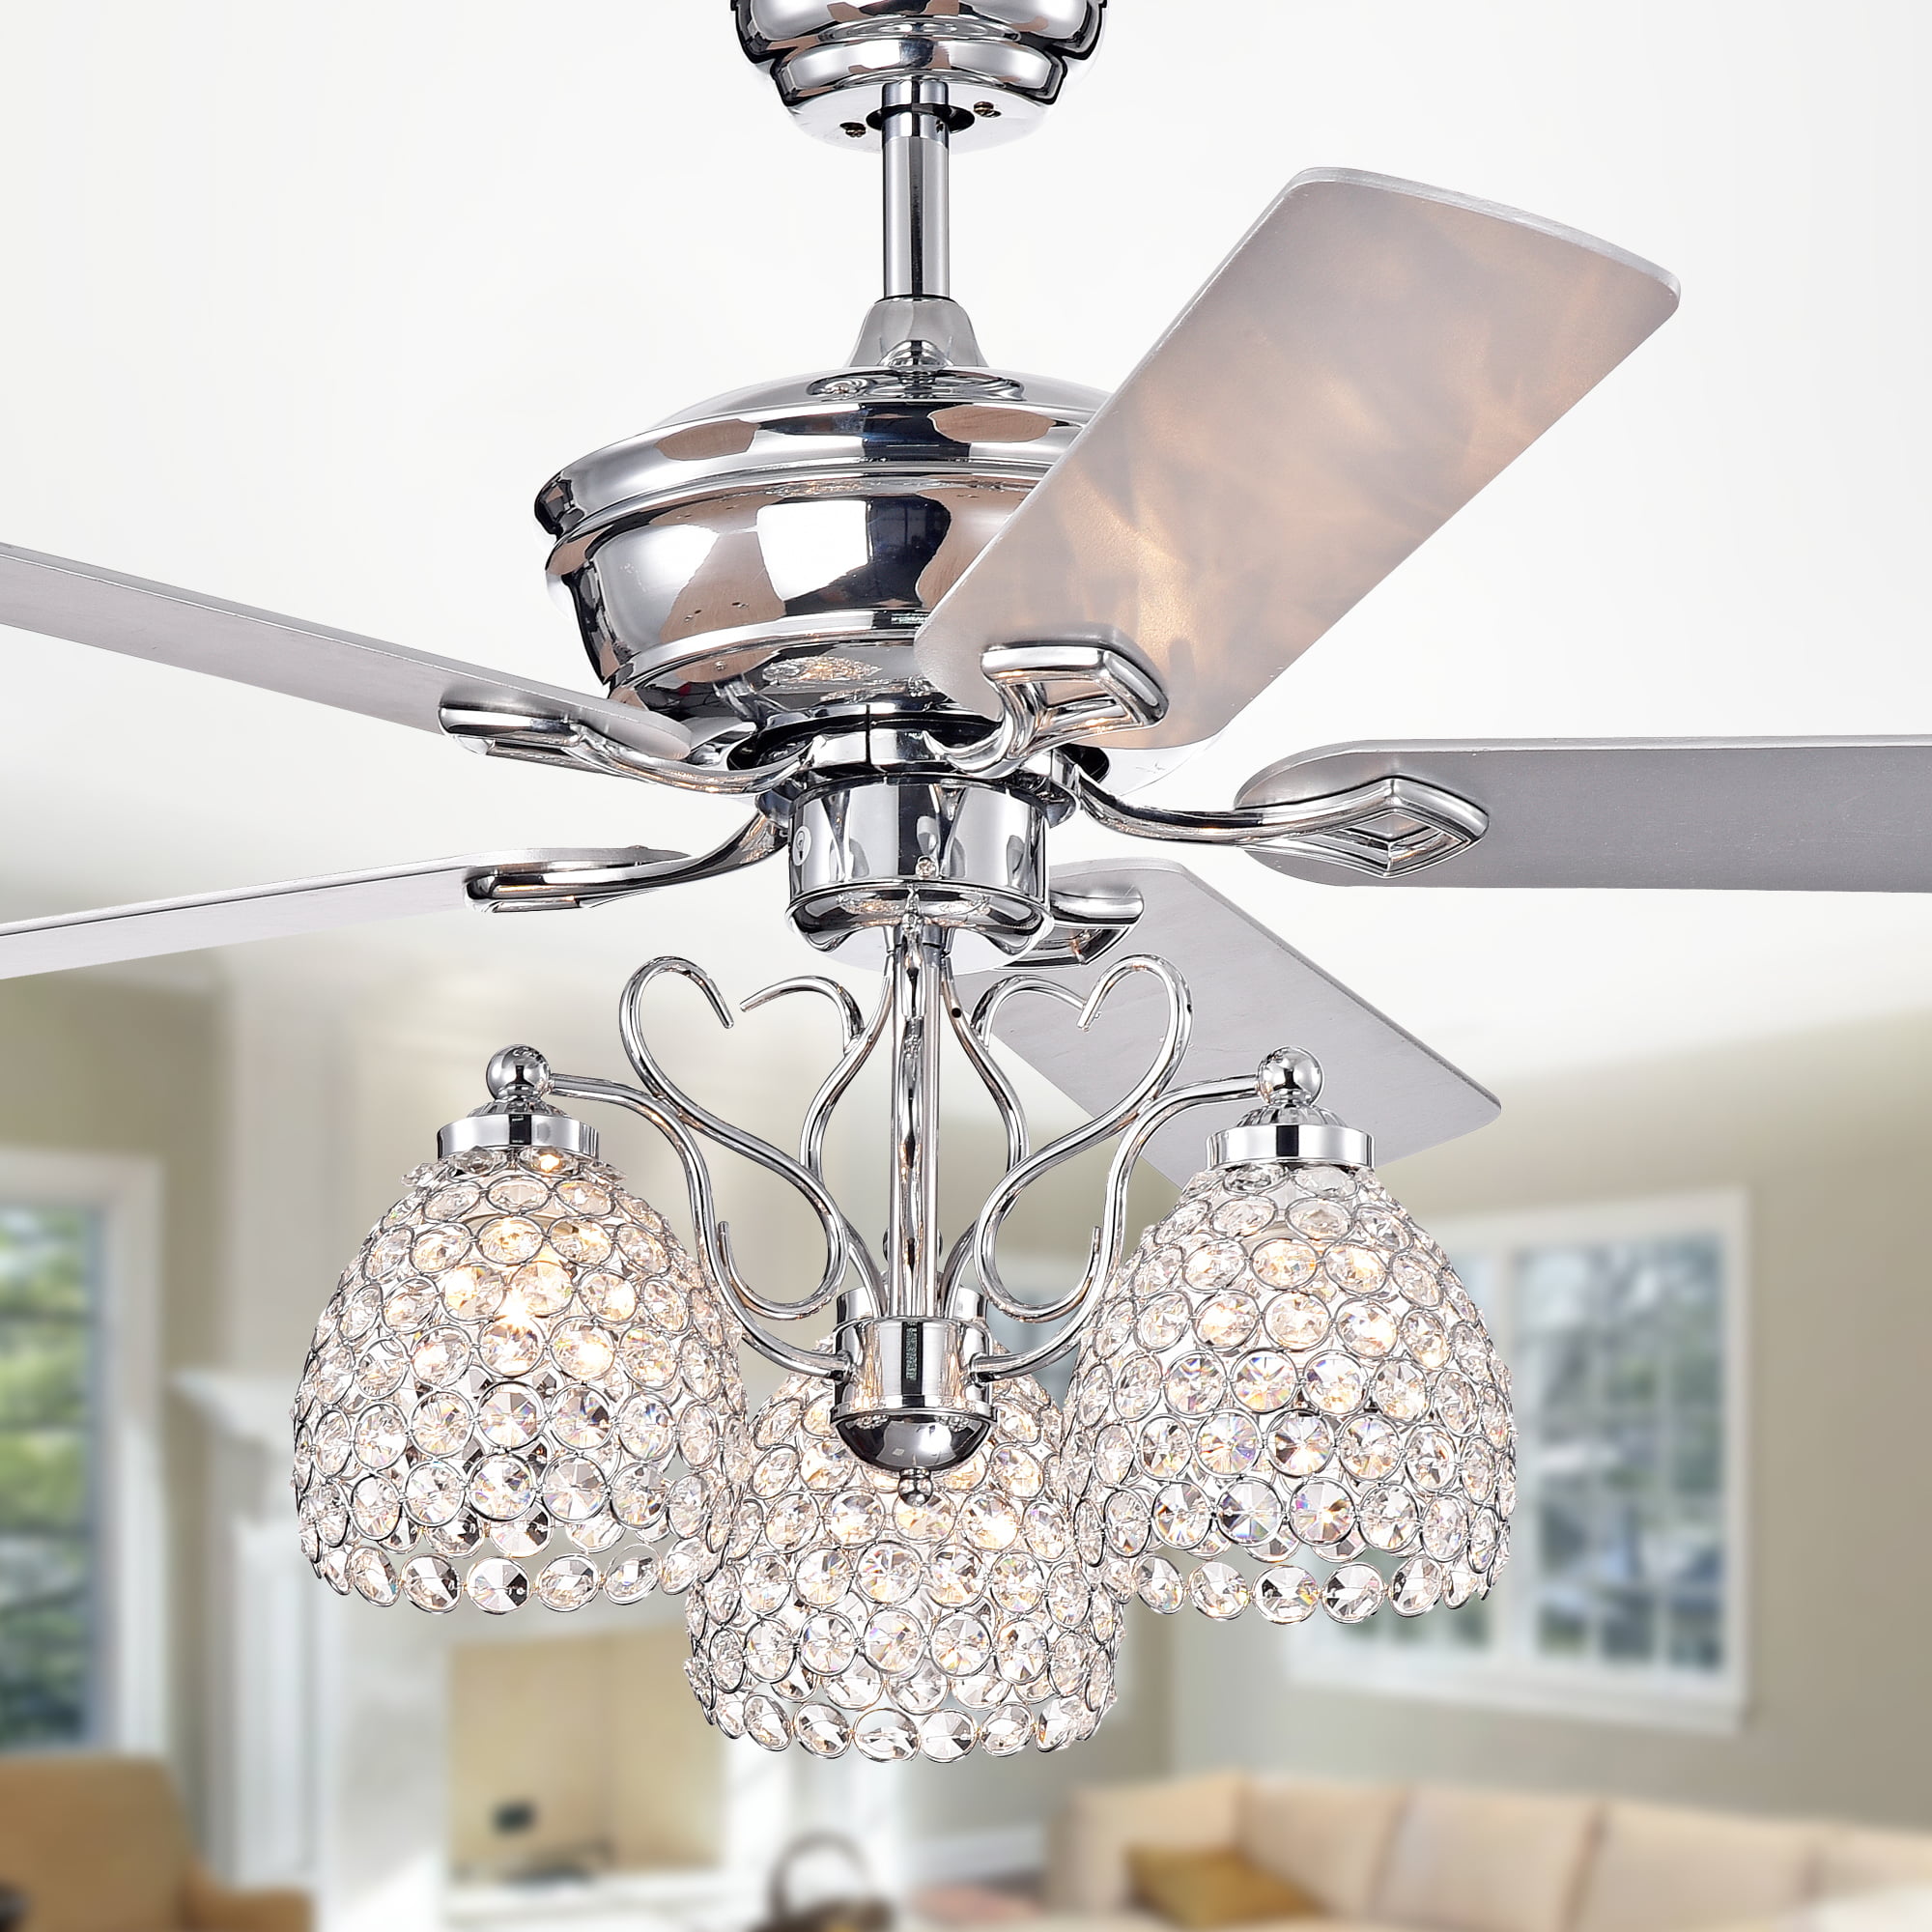 Boffen 52-inch 3-light Lighted Ceiling Fan with Crystal ...